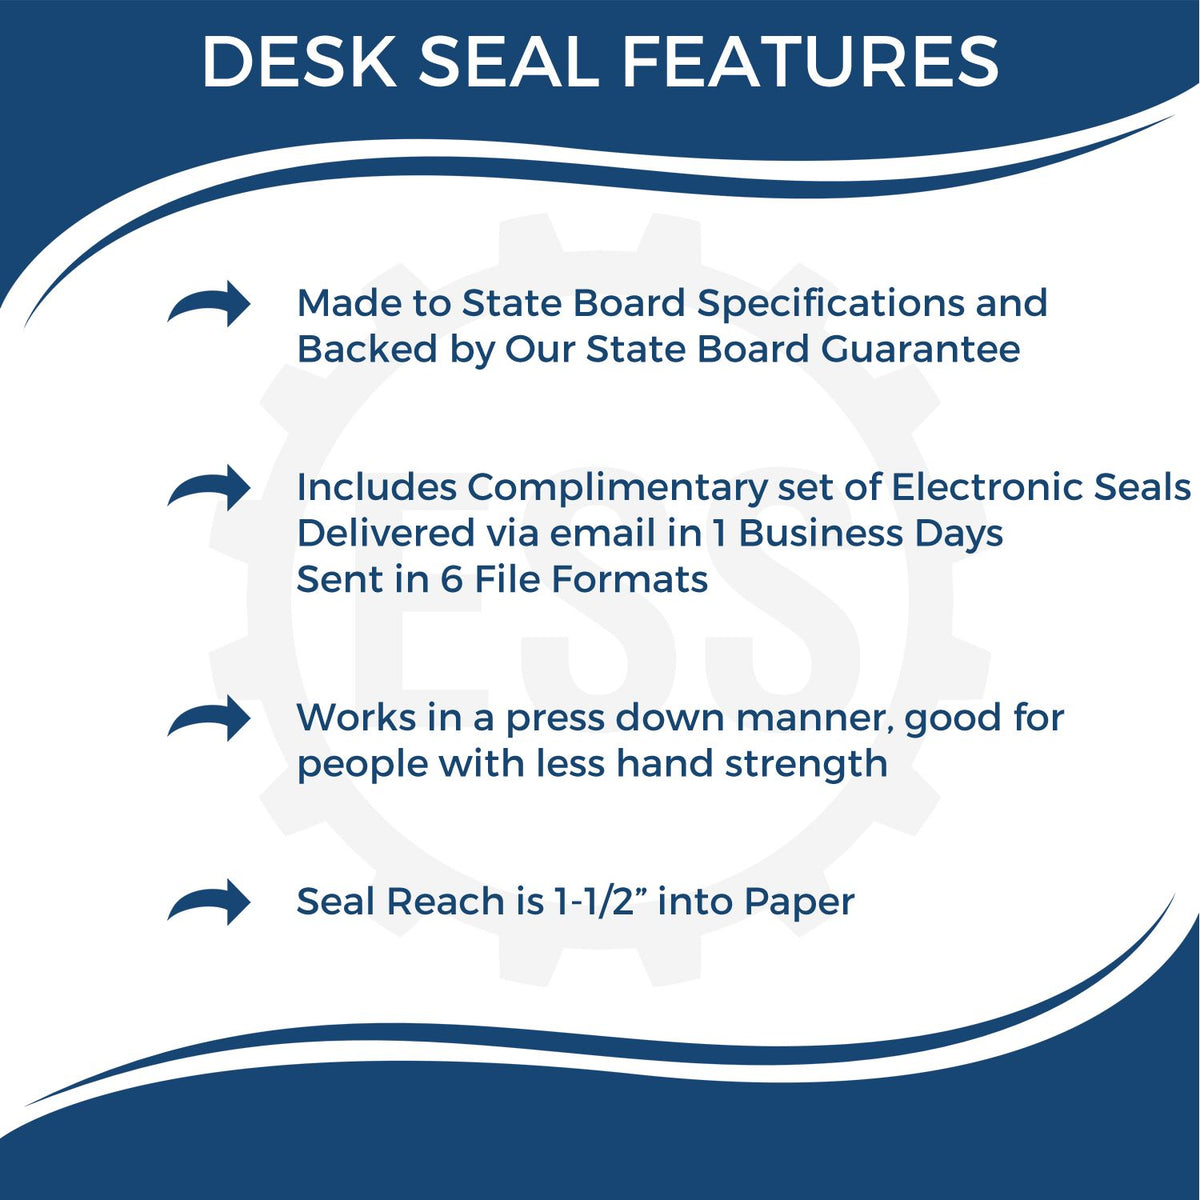 A picture of an infographic highlighting the selling points for the Georgia Desk Surveyor Seal Embosser